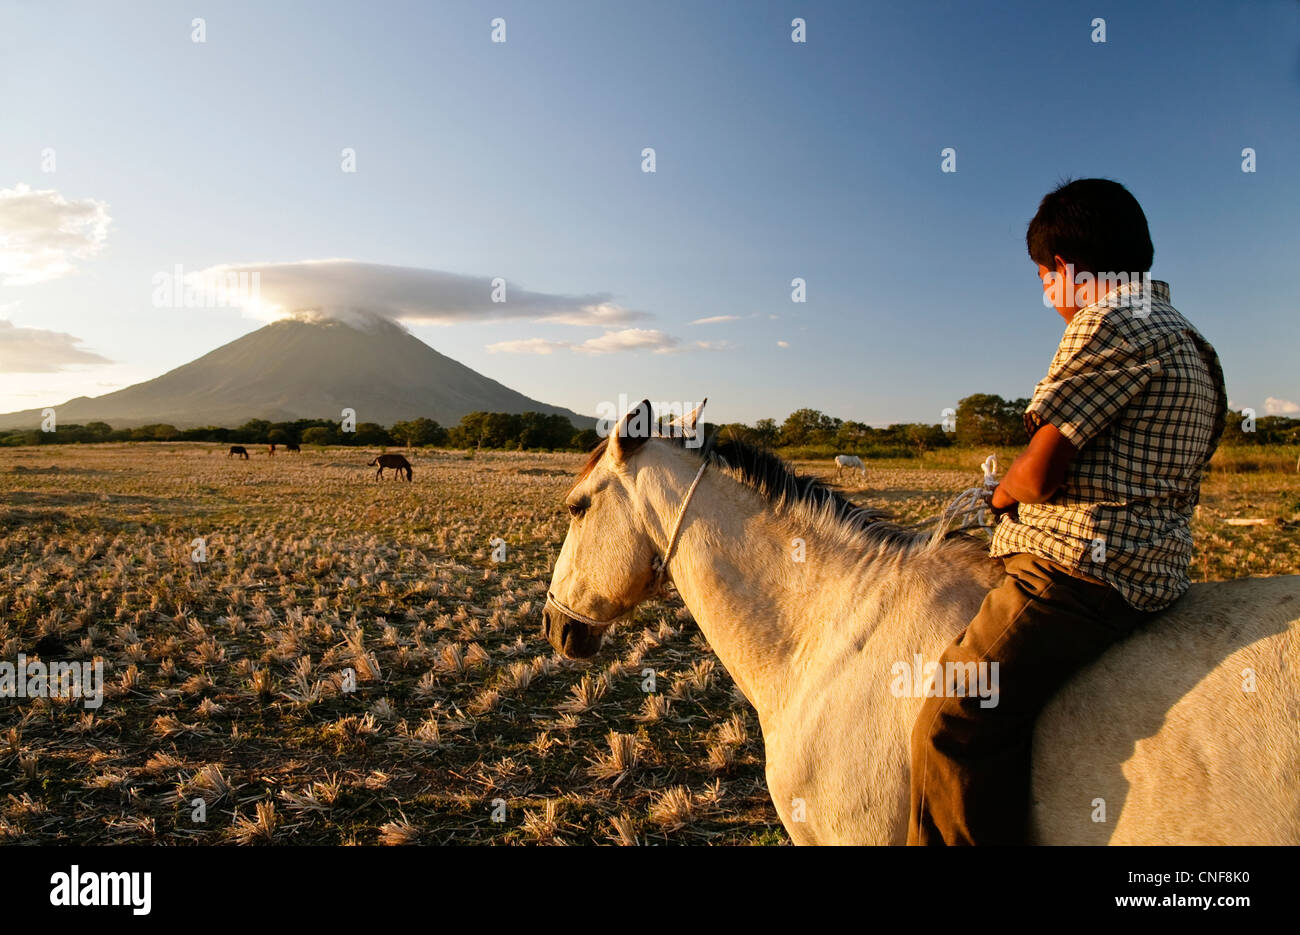 Nicaragua Isla Ometepe Lake Nicaragua young cowboy getting his cattle back to the farm in the evening vulcano Concepciòn Stock Photo